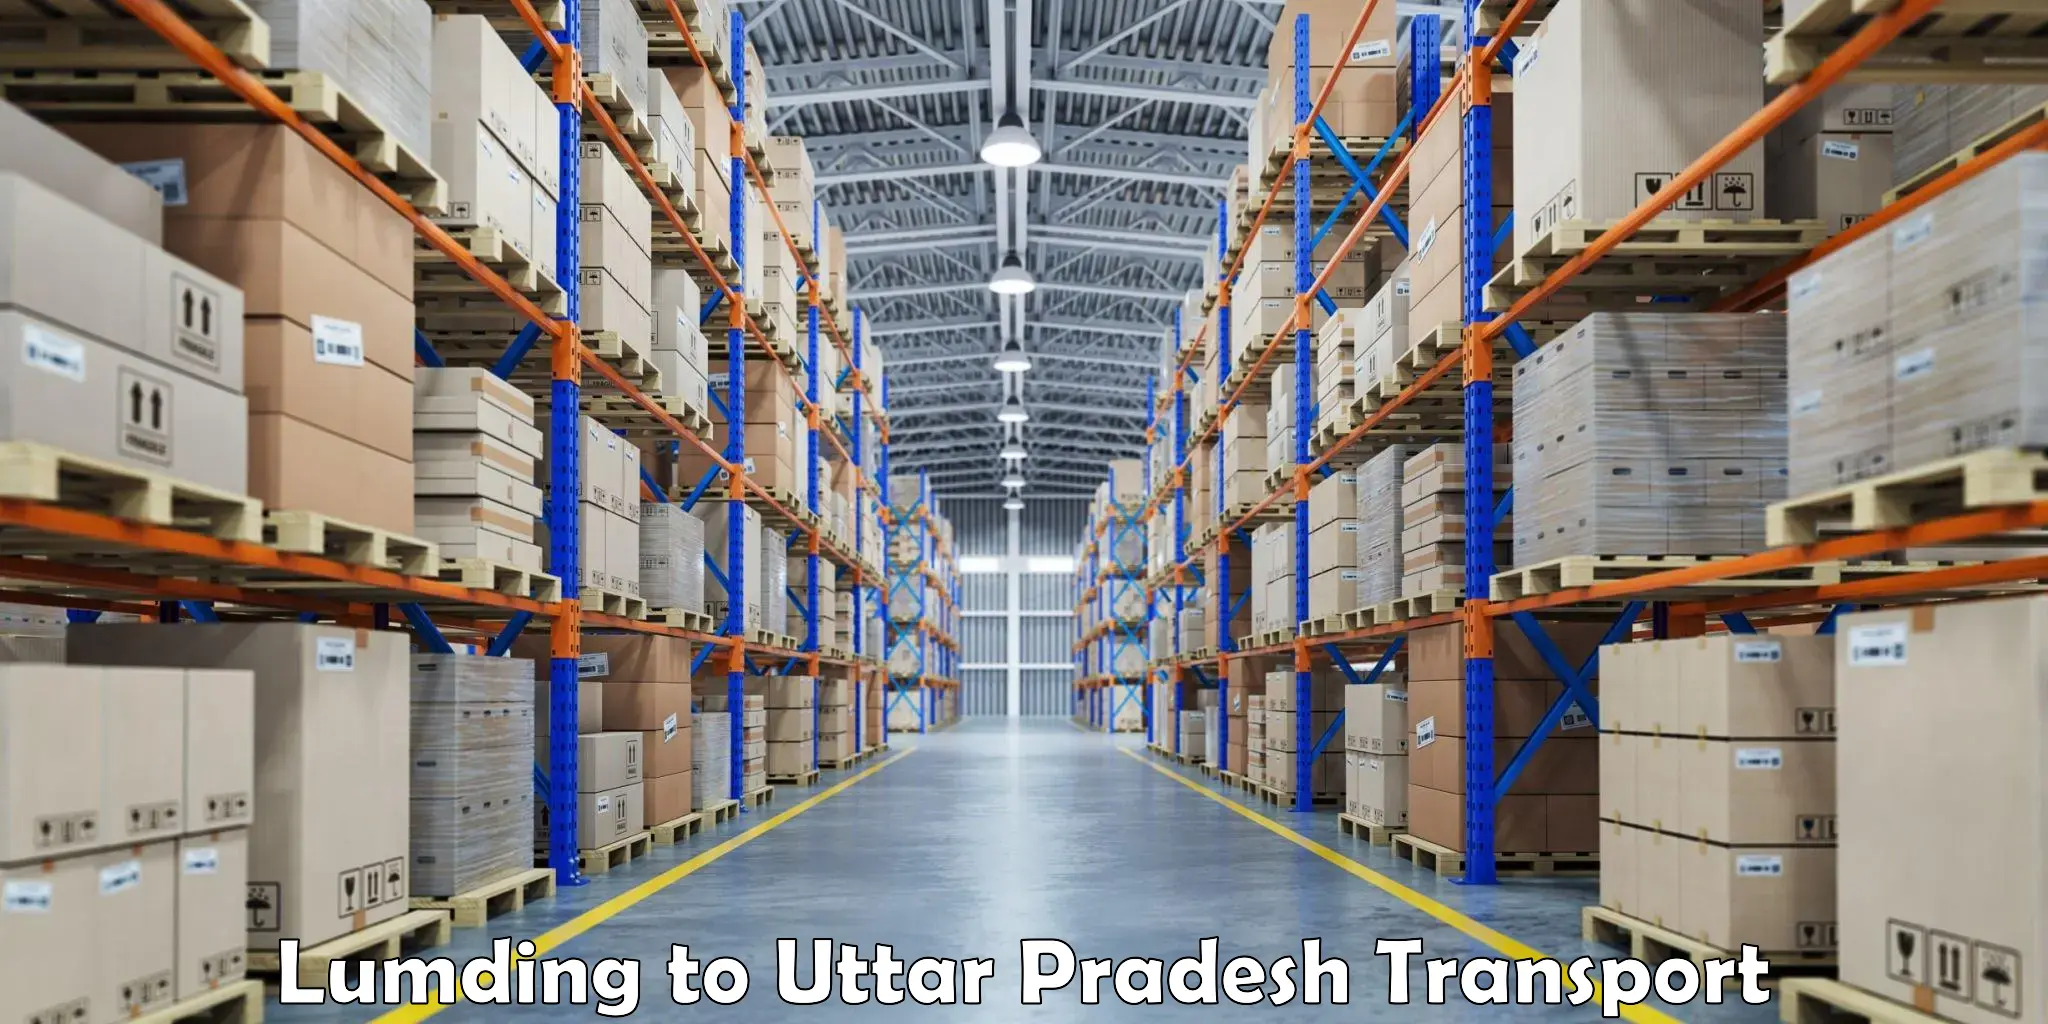 Road transport services in Lumding to Allahabad